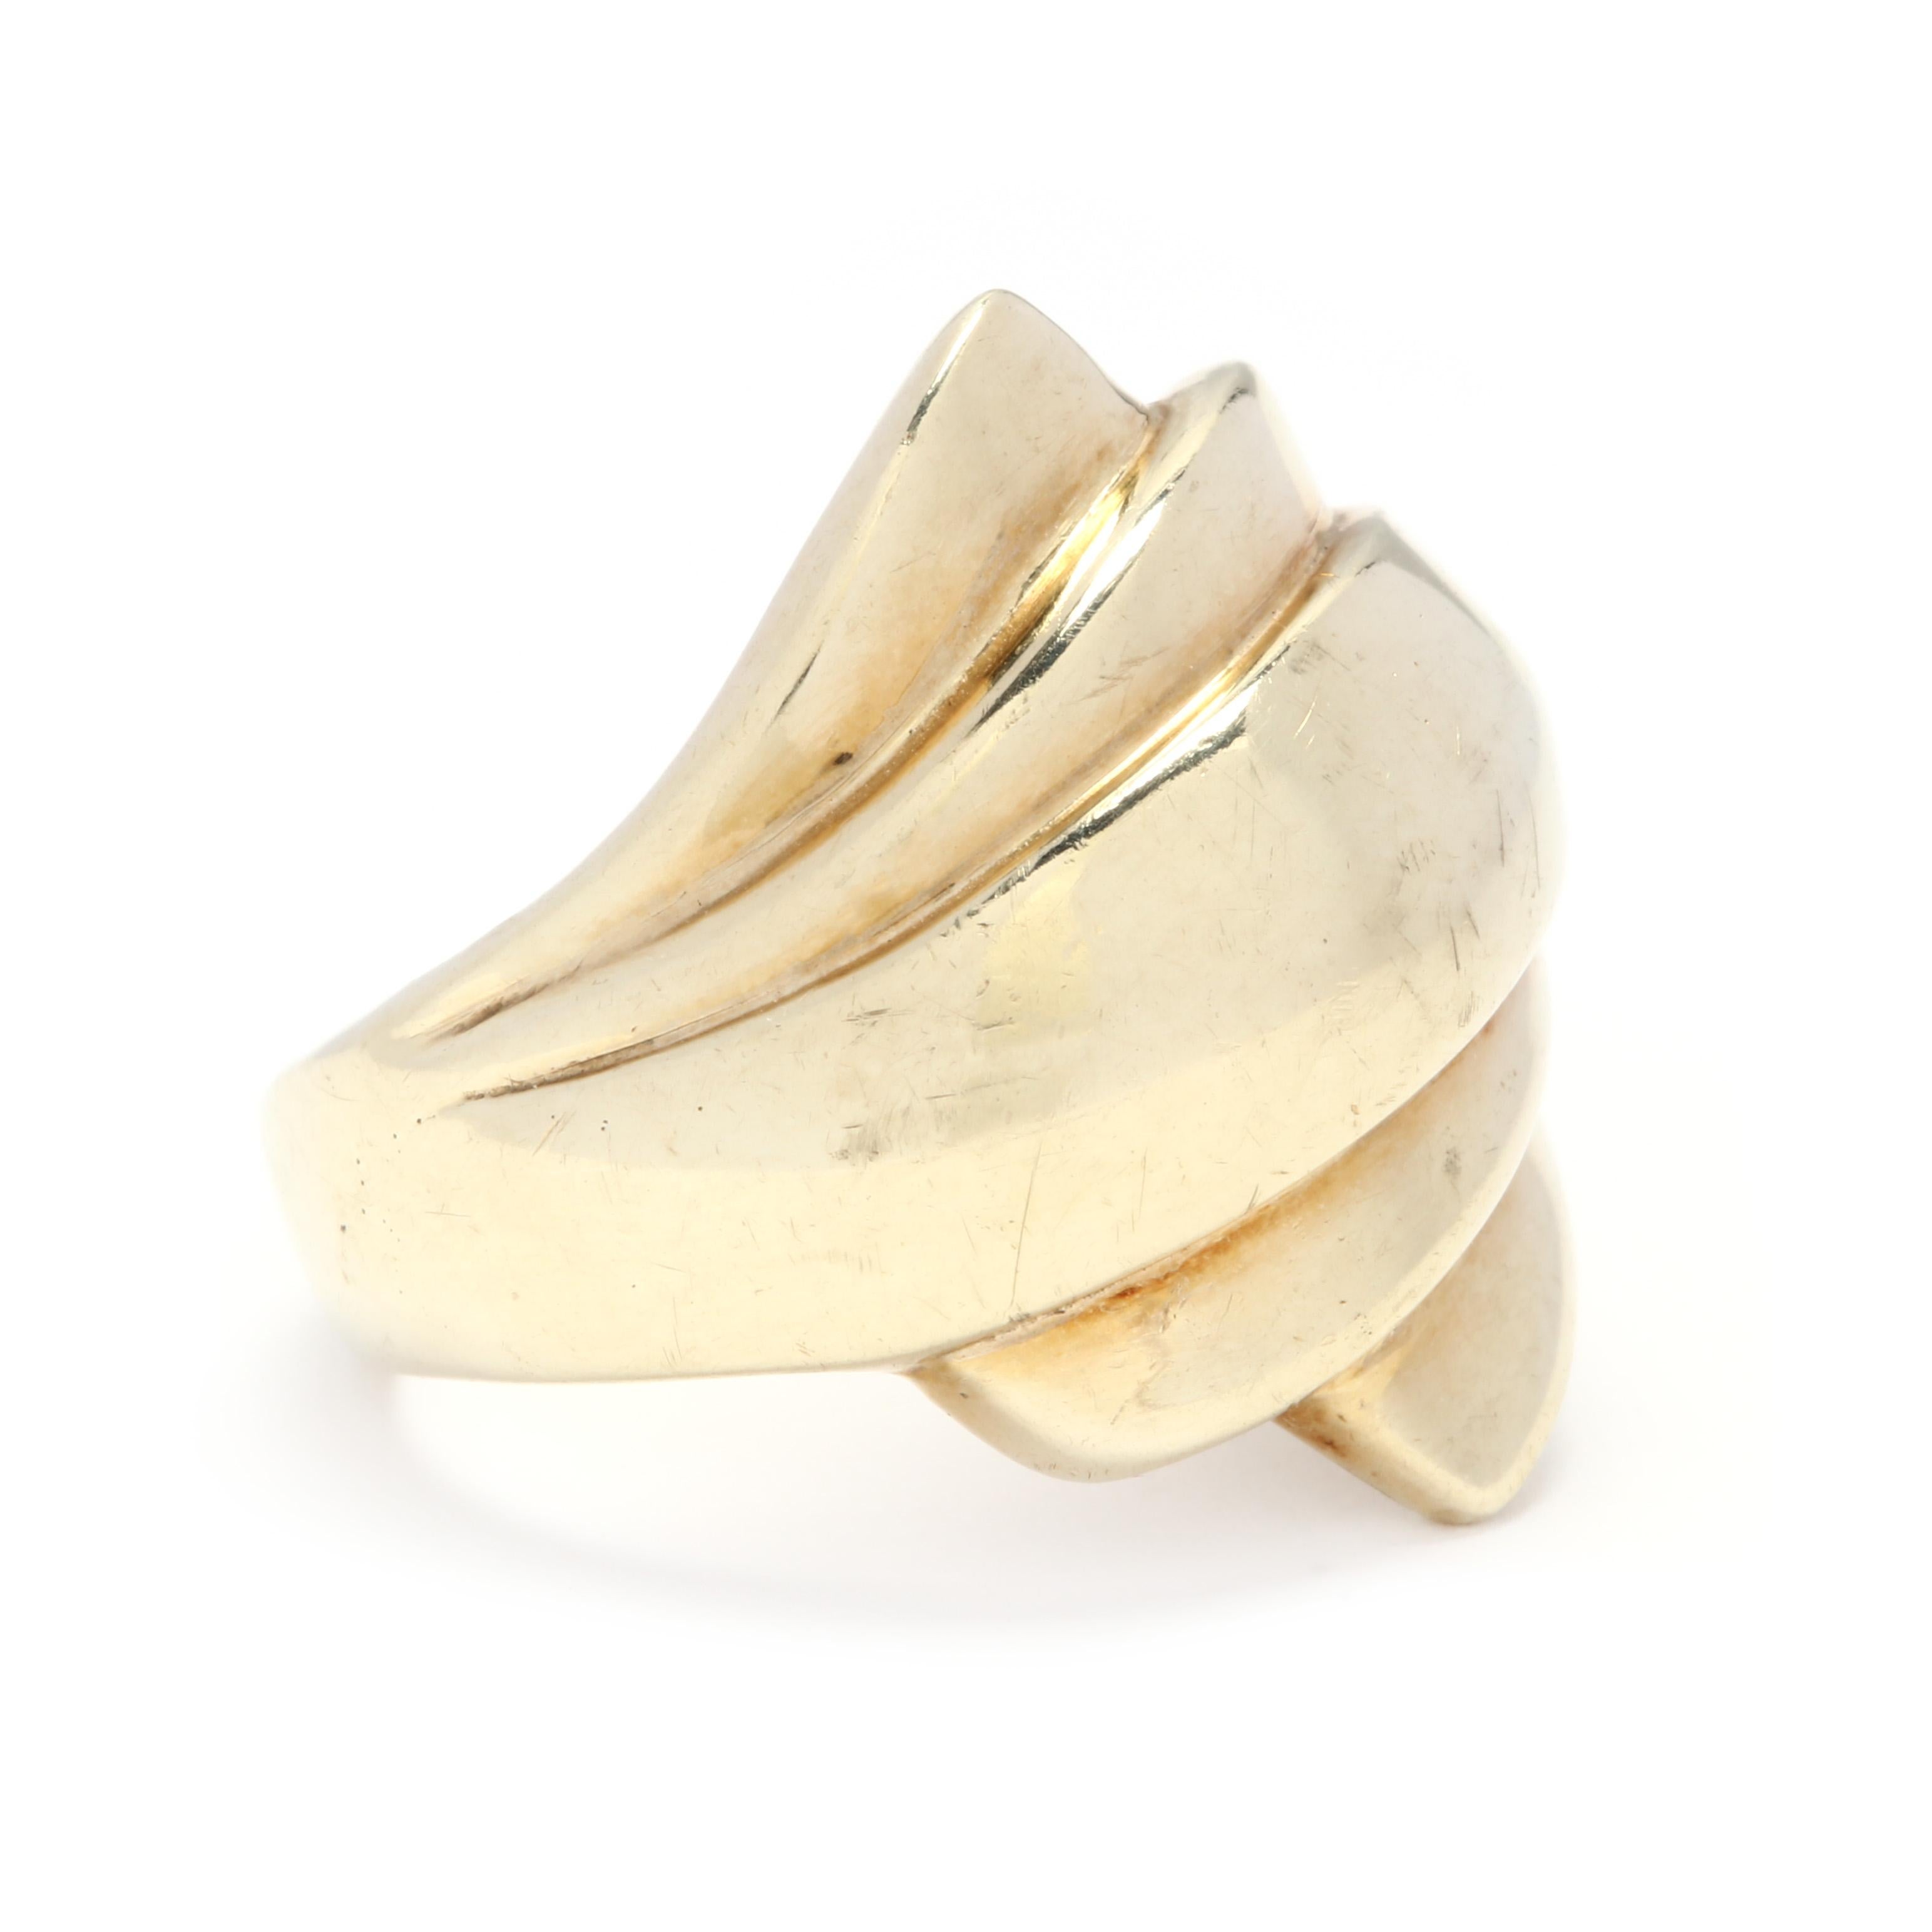 Circa 1980's, a 14 karat yellow gold ridged bypass ring. This ring features geometric bypass design with ridged detailing. We are IN LOVE with this ring. A big chuck of gold but light enough to not weigh you down in your busy life...The PERFECT